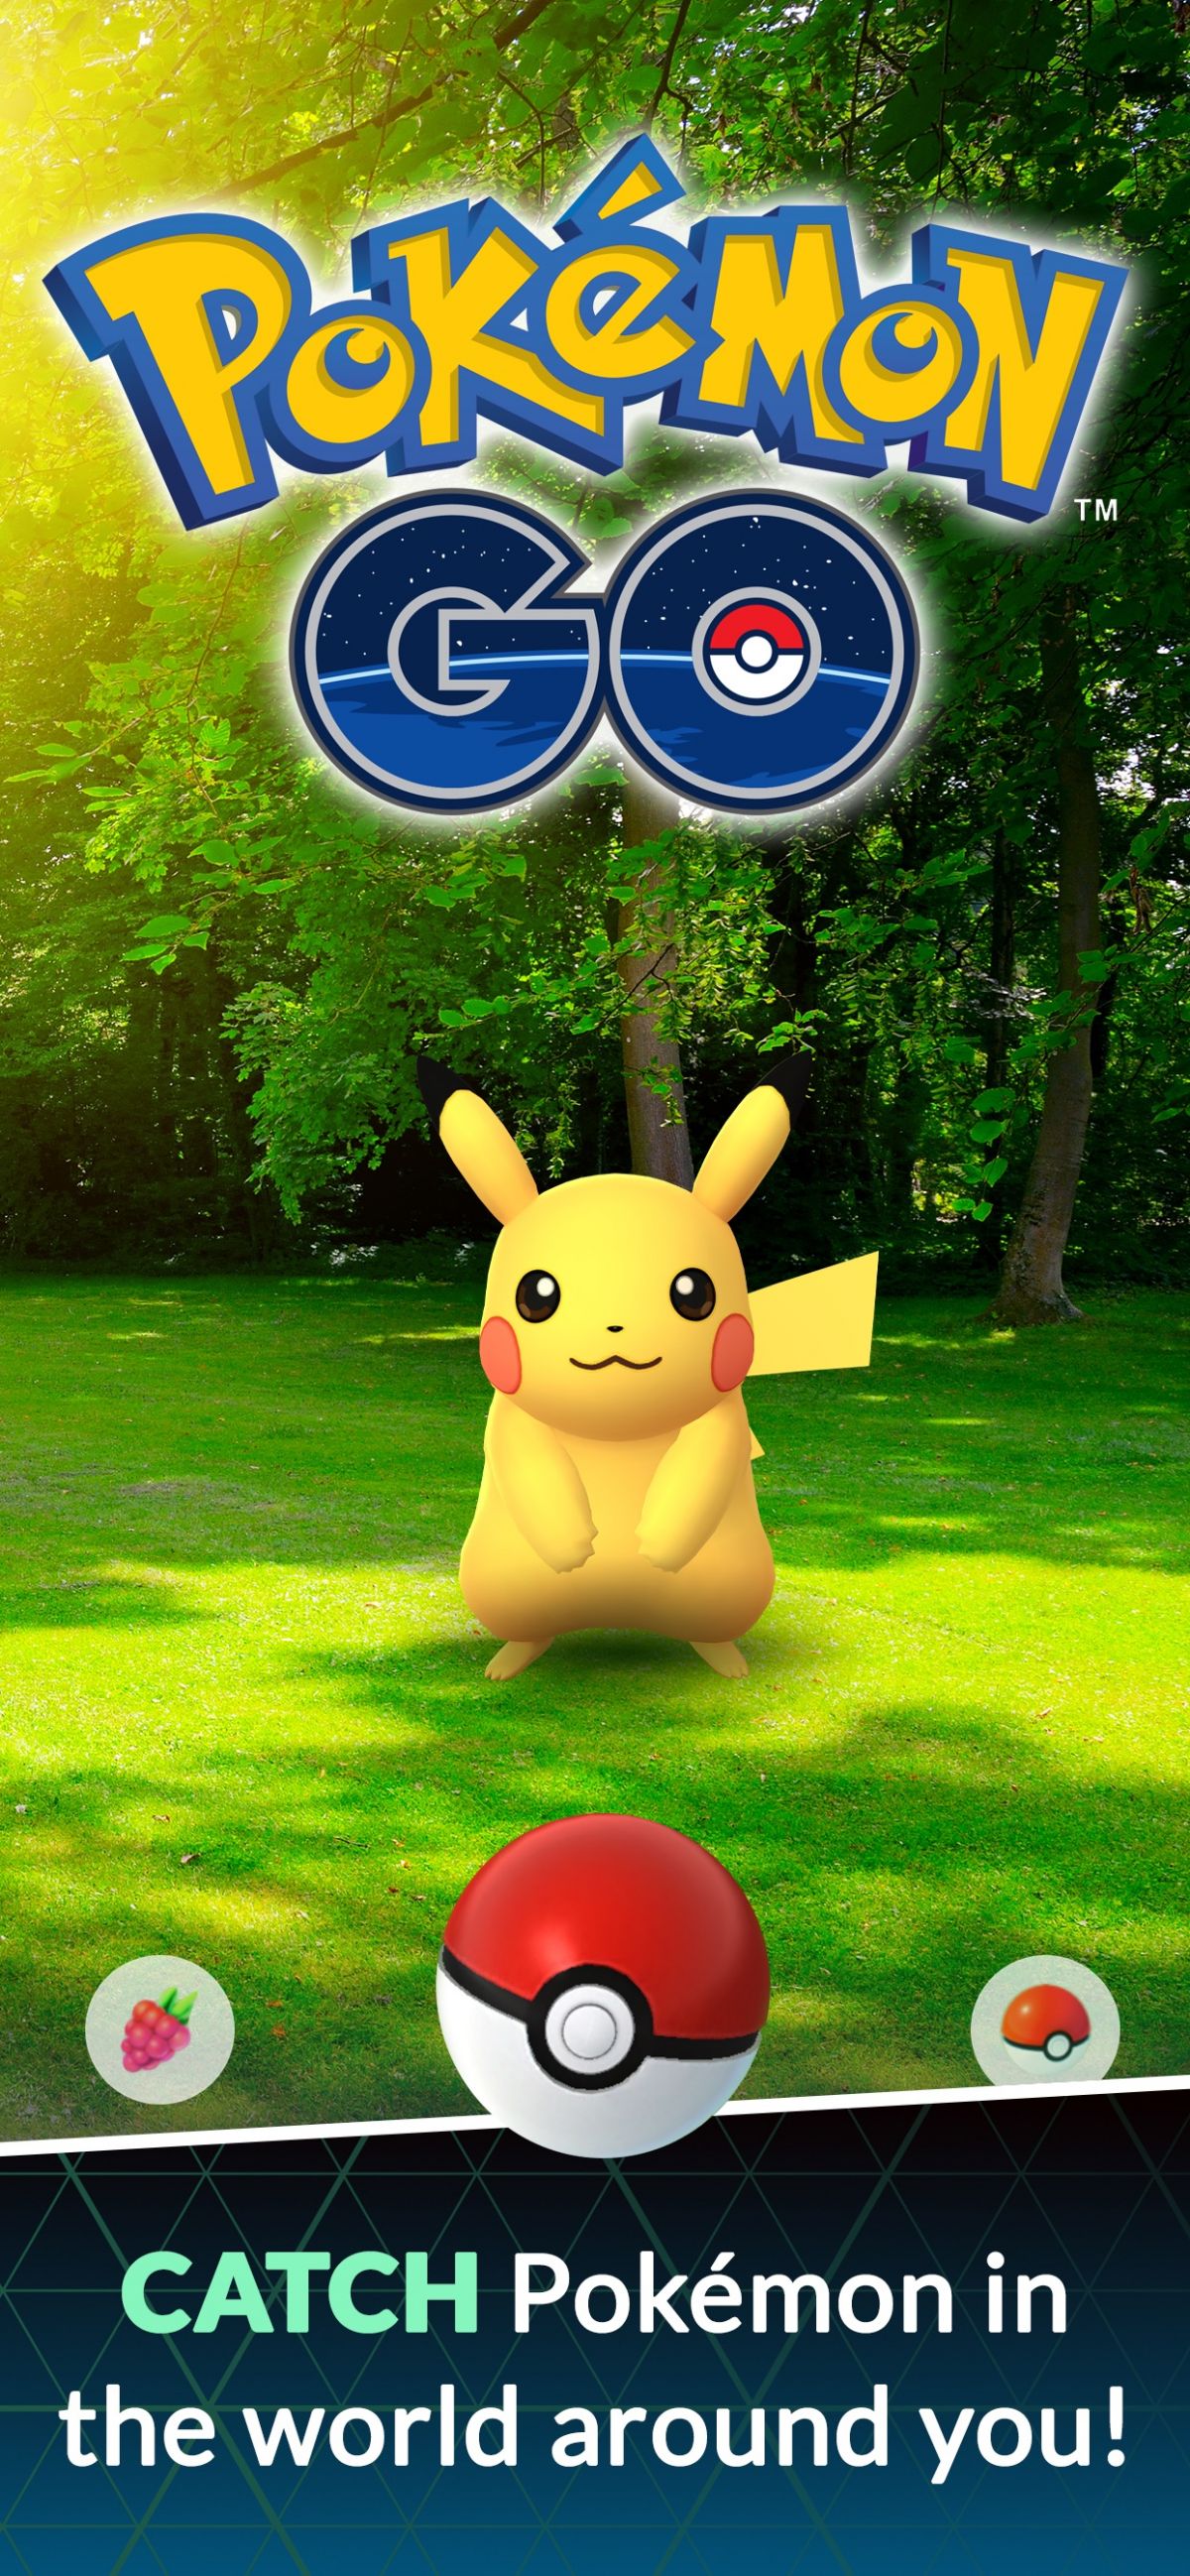 Pokemon Go We Update Our Recommendations Daily The Latest And Most